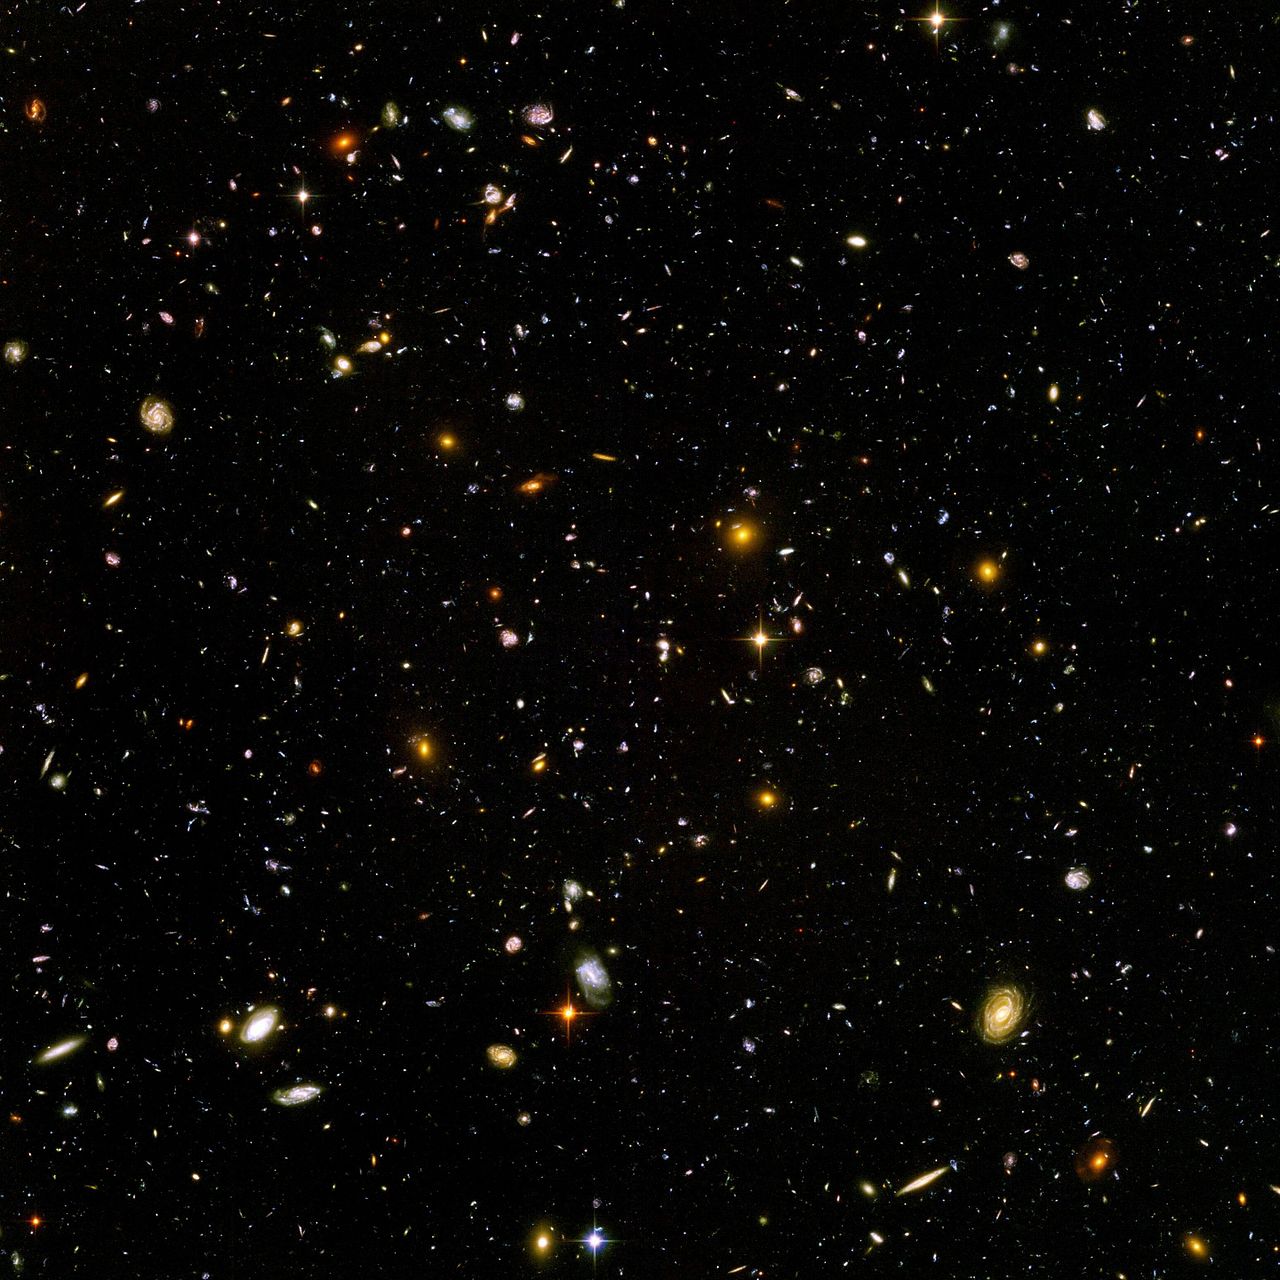 The Hubble Ultra Deep Field, is an image of a small region of space in the constellation Fornax, composited from Hubble Space Telescope data accumulated over a period from September 3, 2003 through January 16, 2004. The patch of sky in which the galaxies reside was chosen because it had a low density of bright stars in the near-field. Image credit: NASA and the European Space Agency